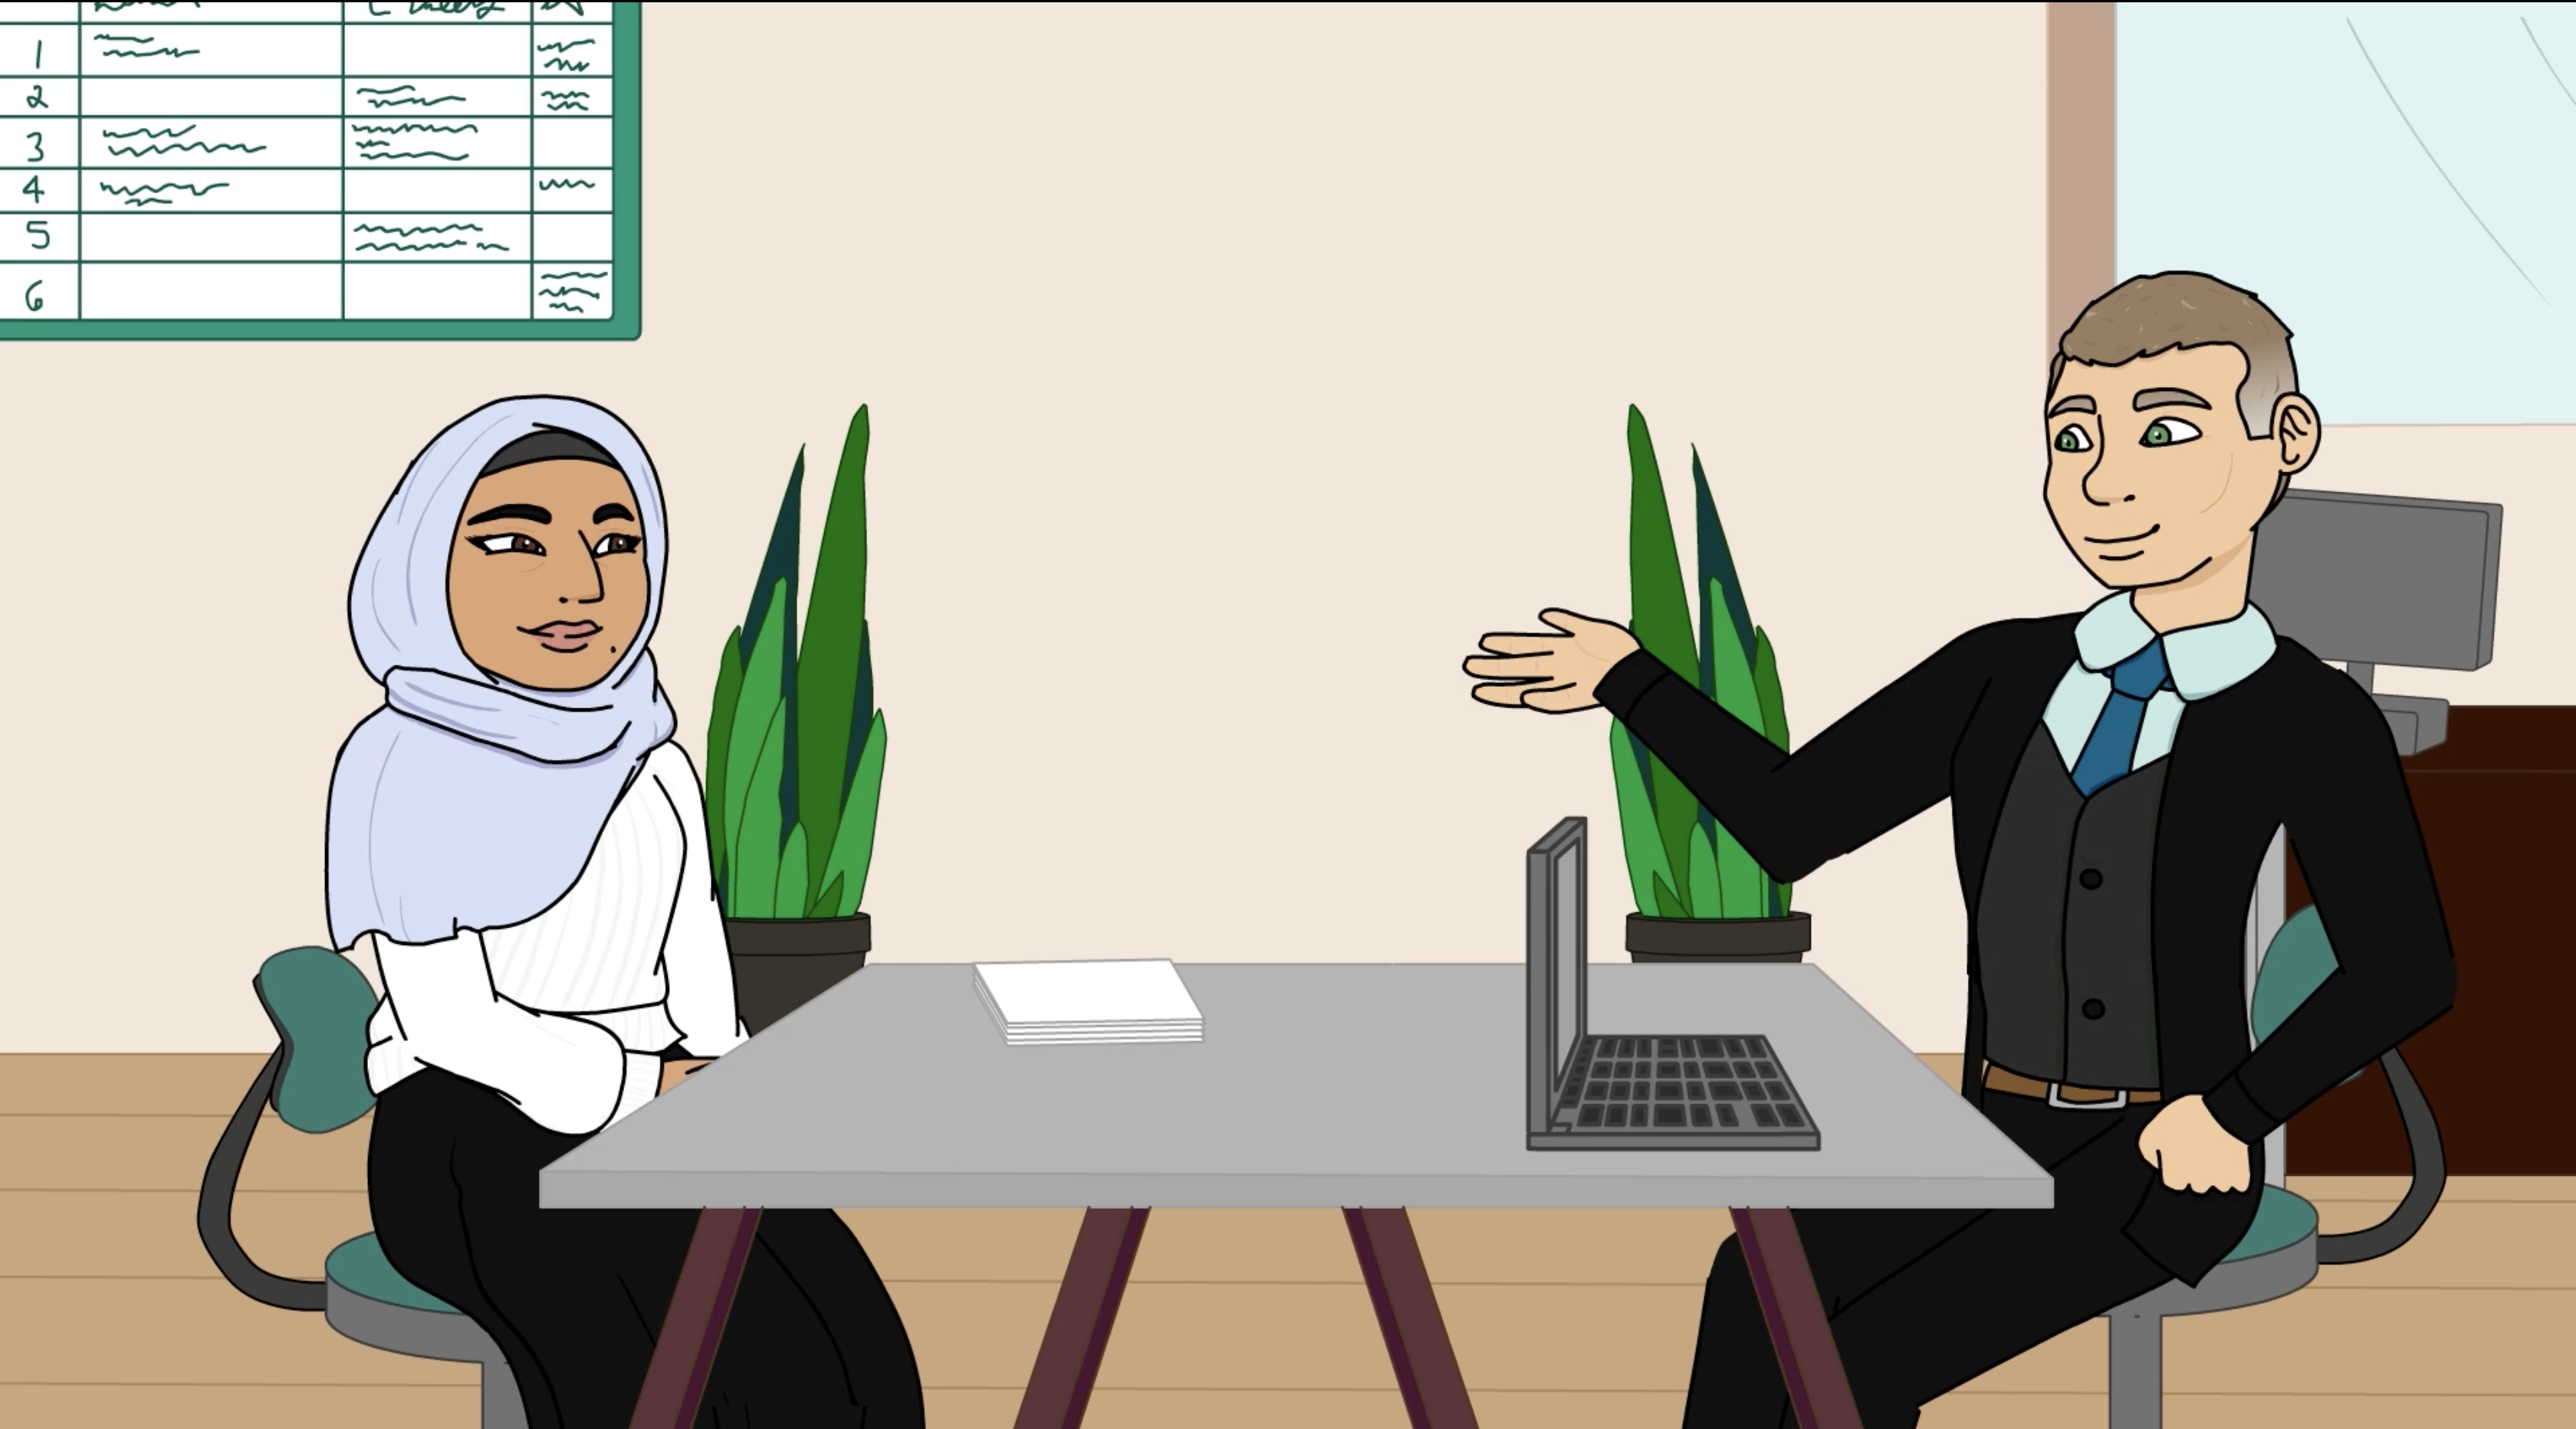 A female employee reacts to inappropriate comments made by a male superior about her hijab.